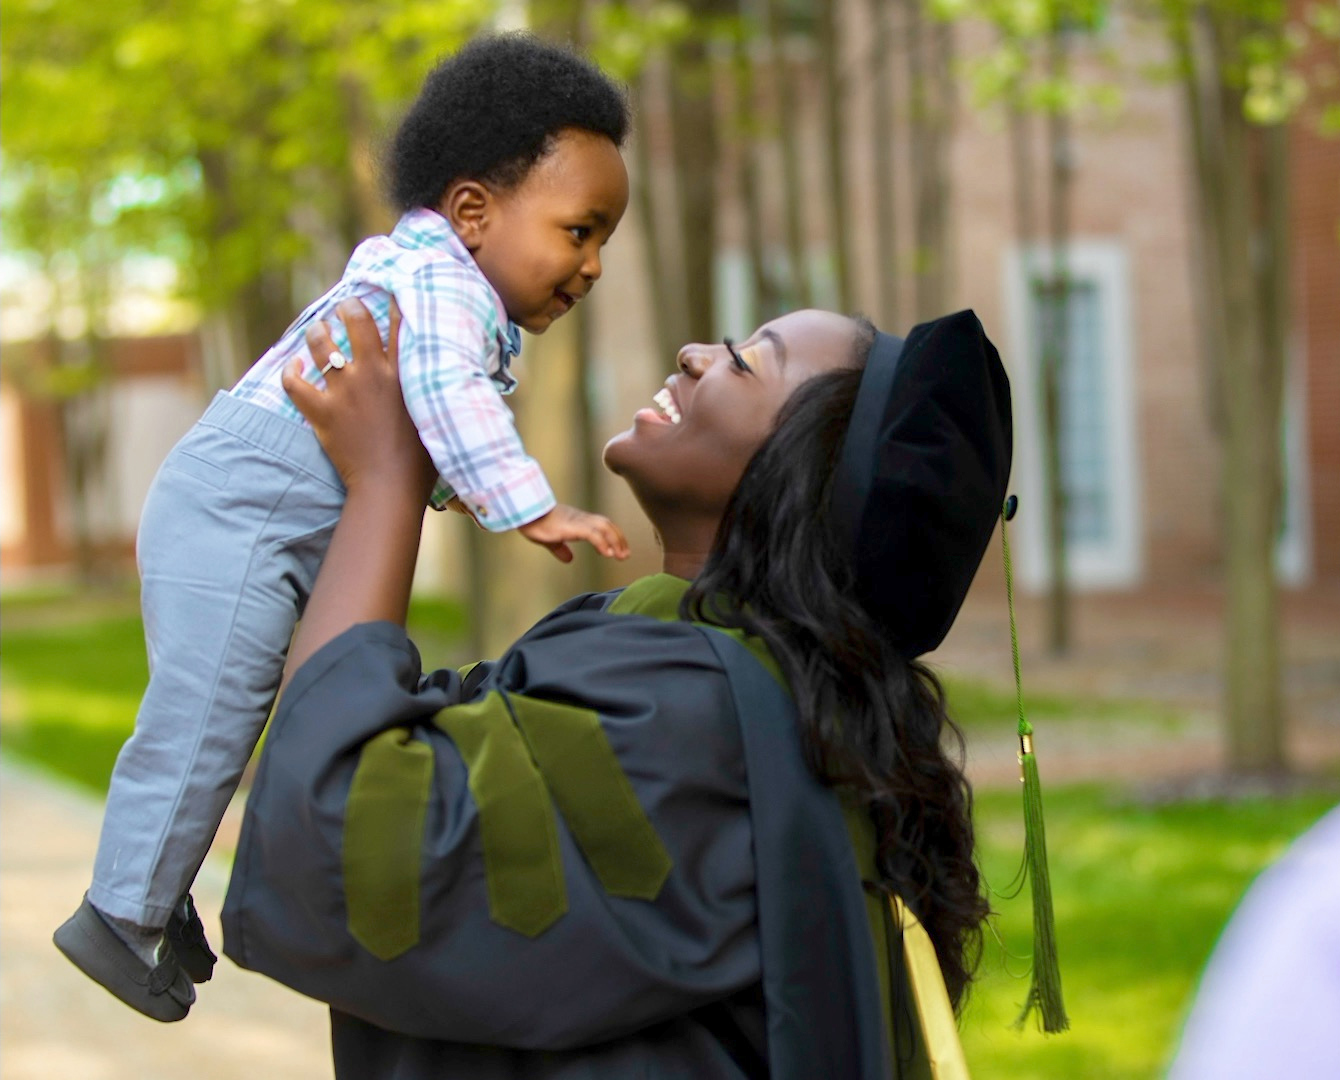 A School of Pharmacy graduate celebrates and holds their child